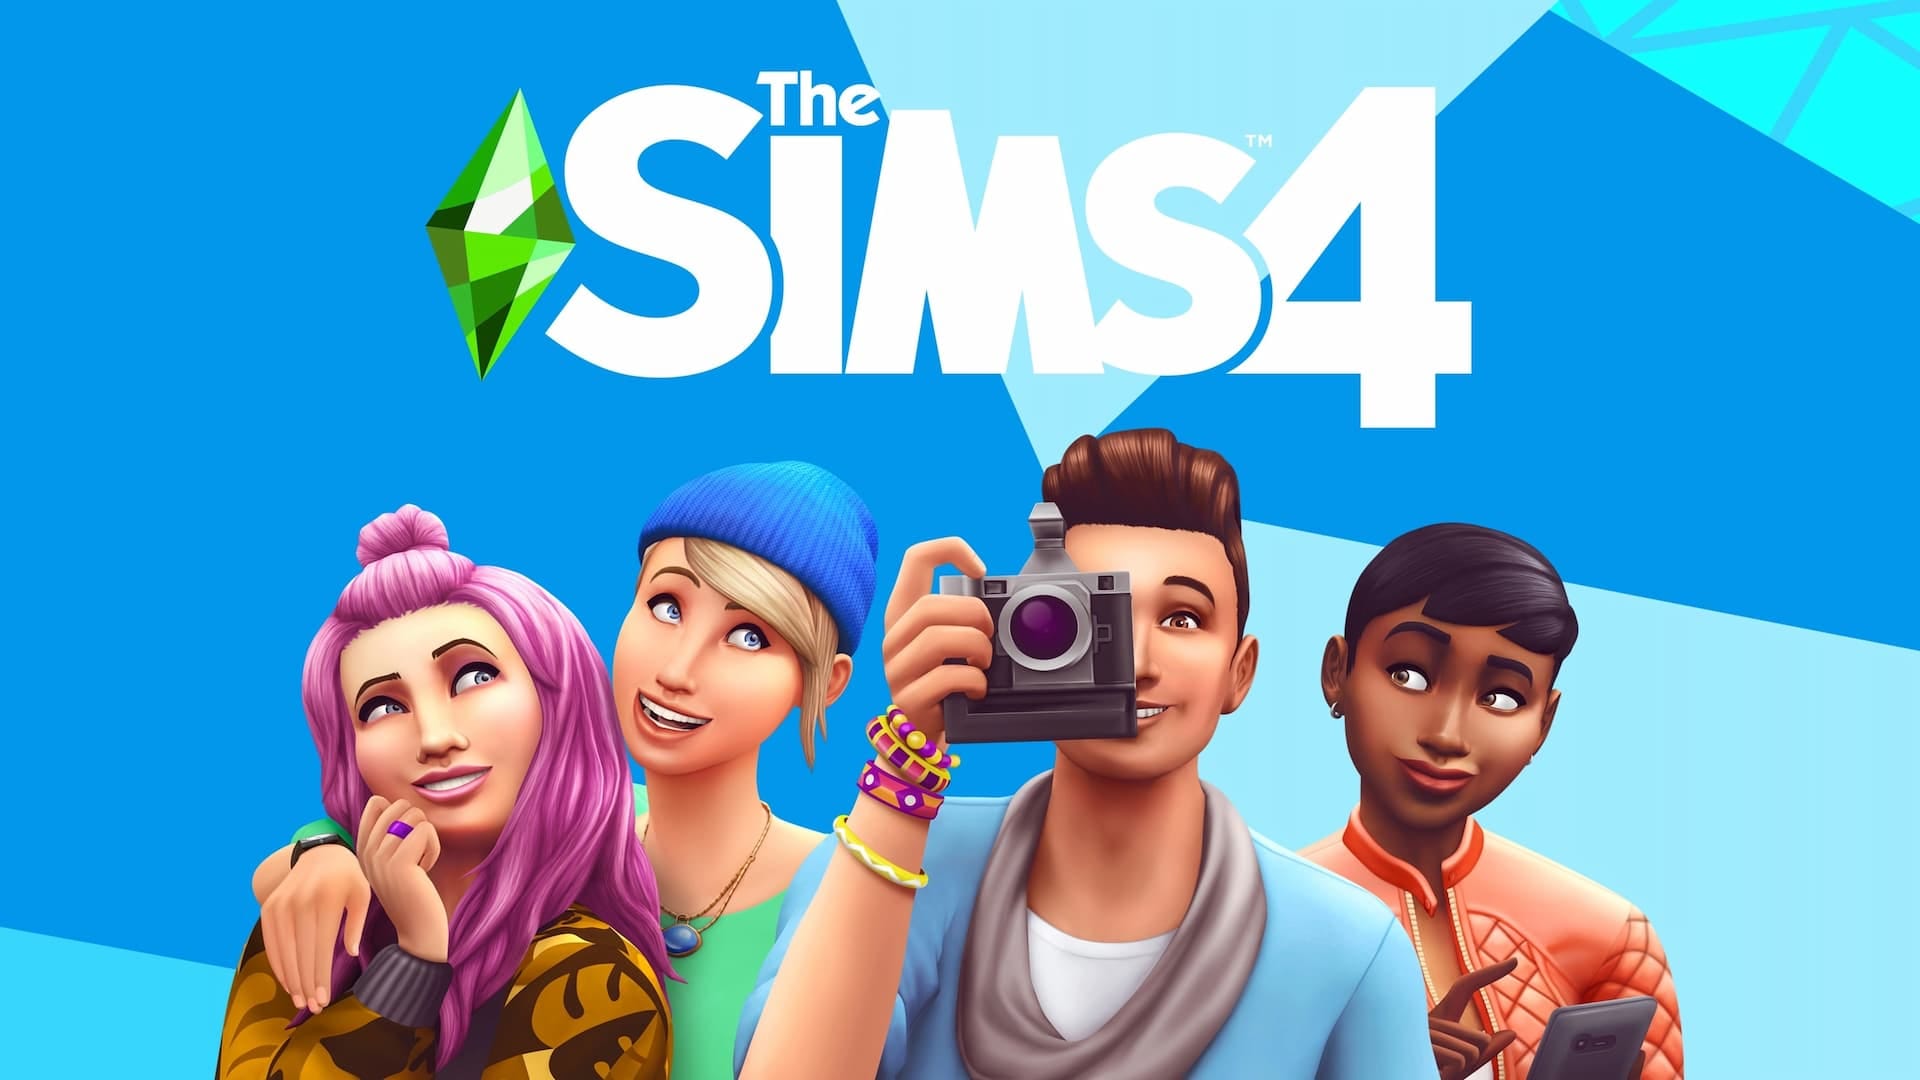 FREE The Sims 4 confirmed by EA! The game will be free-2-play next month  (updated)